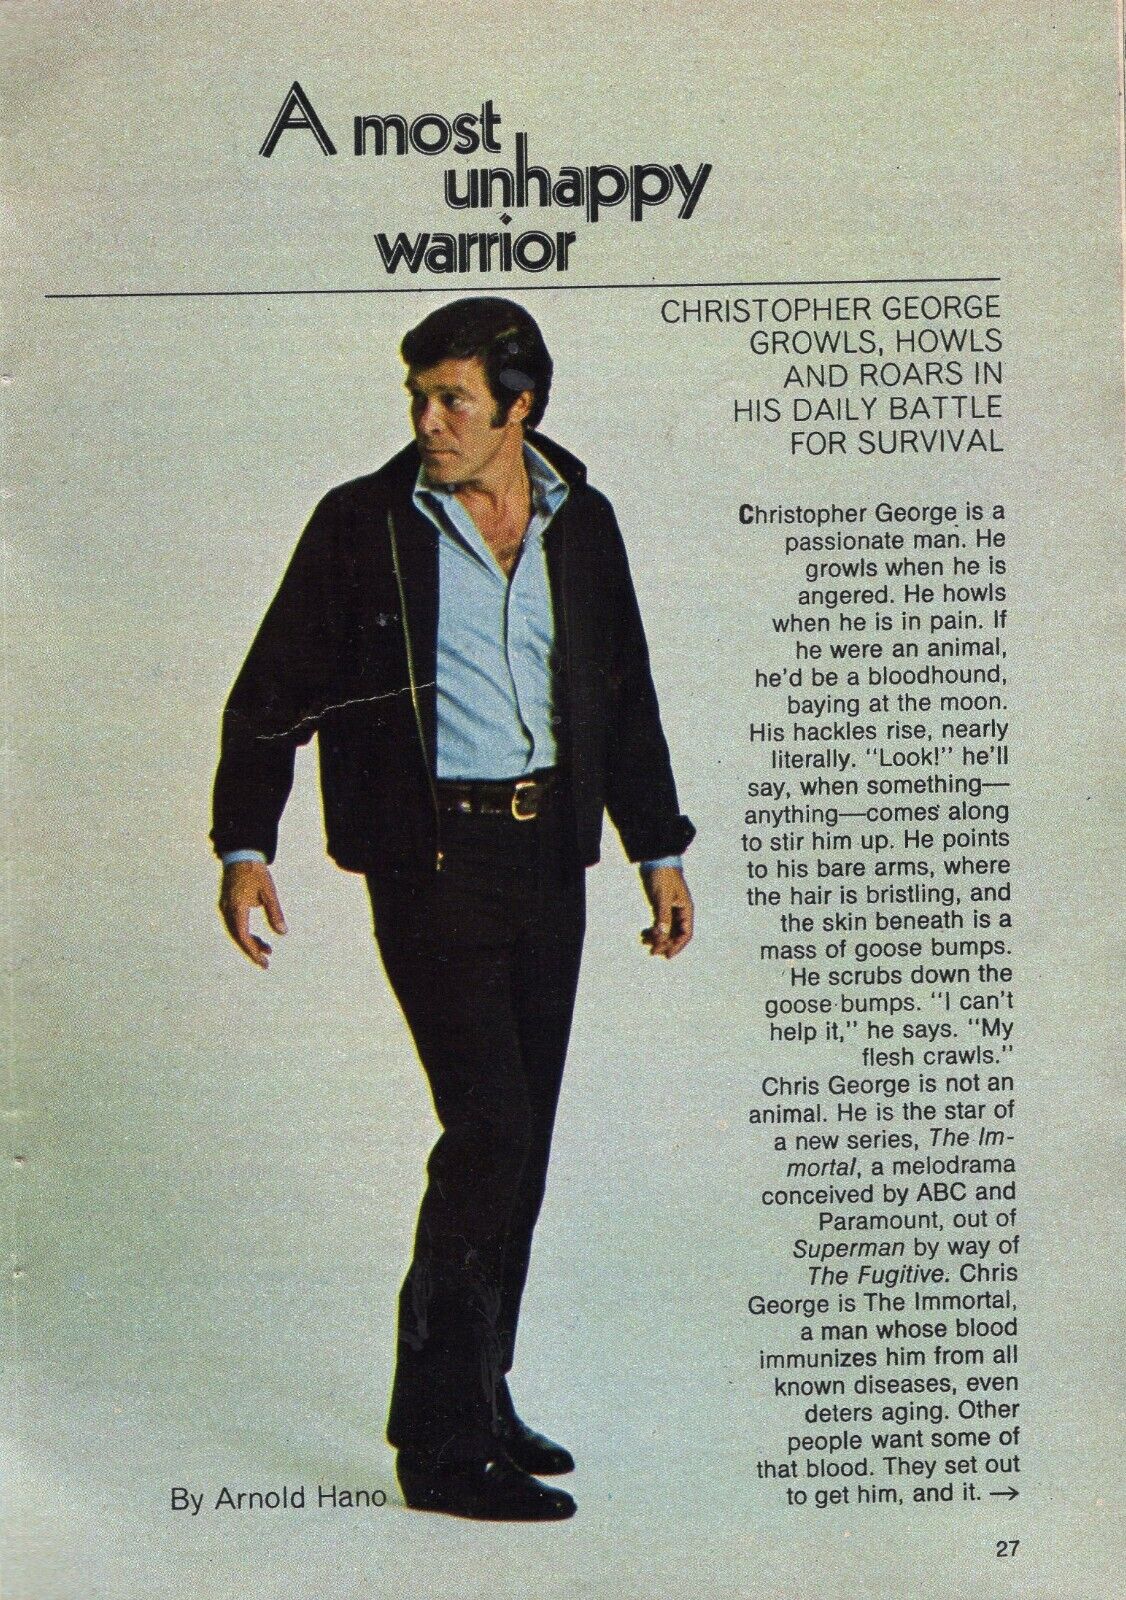 1970 TV ARTICLE CHRISTOPHER CHRIS GEORGE THE IMMORTAL SERIES UNHAPPY WARRIOR